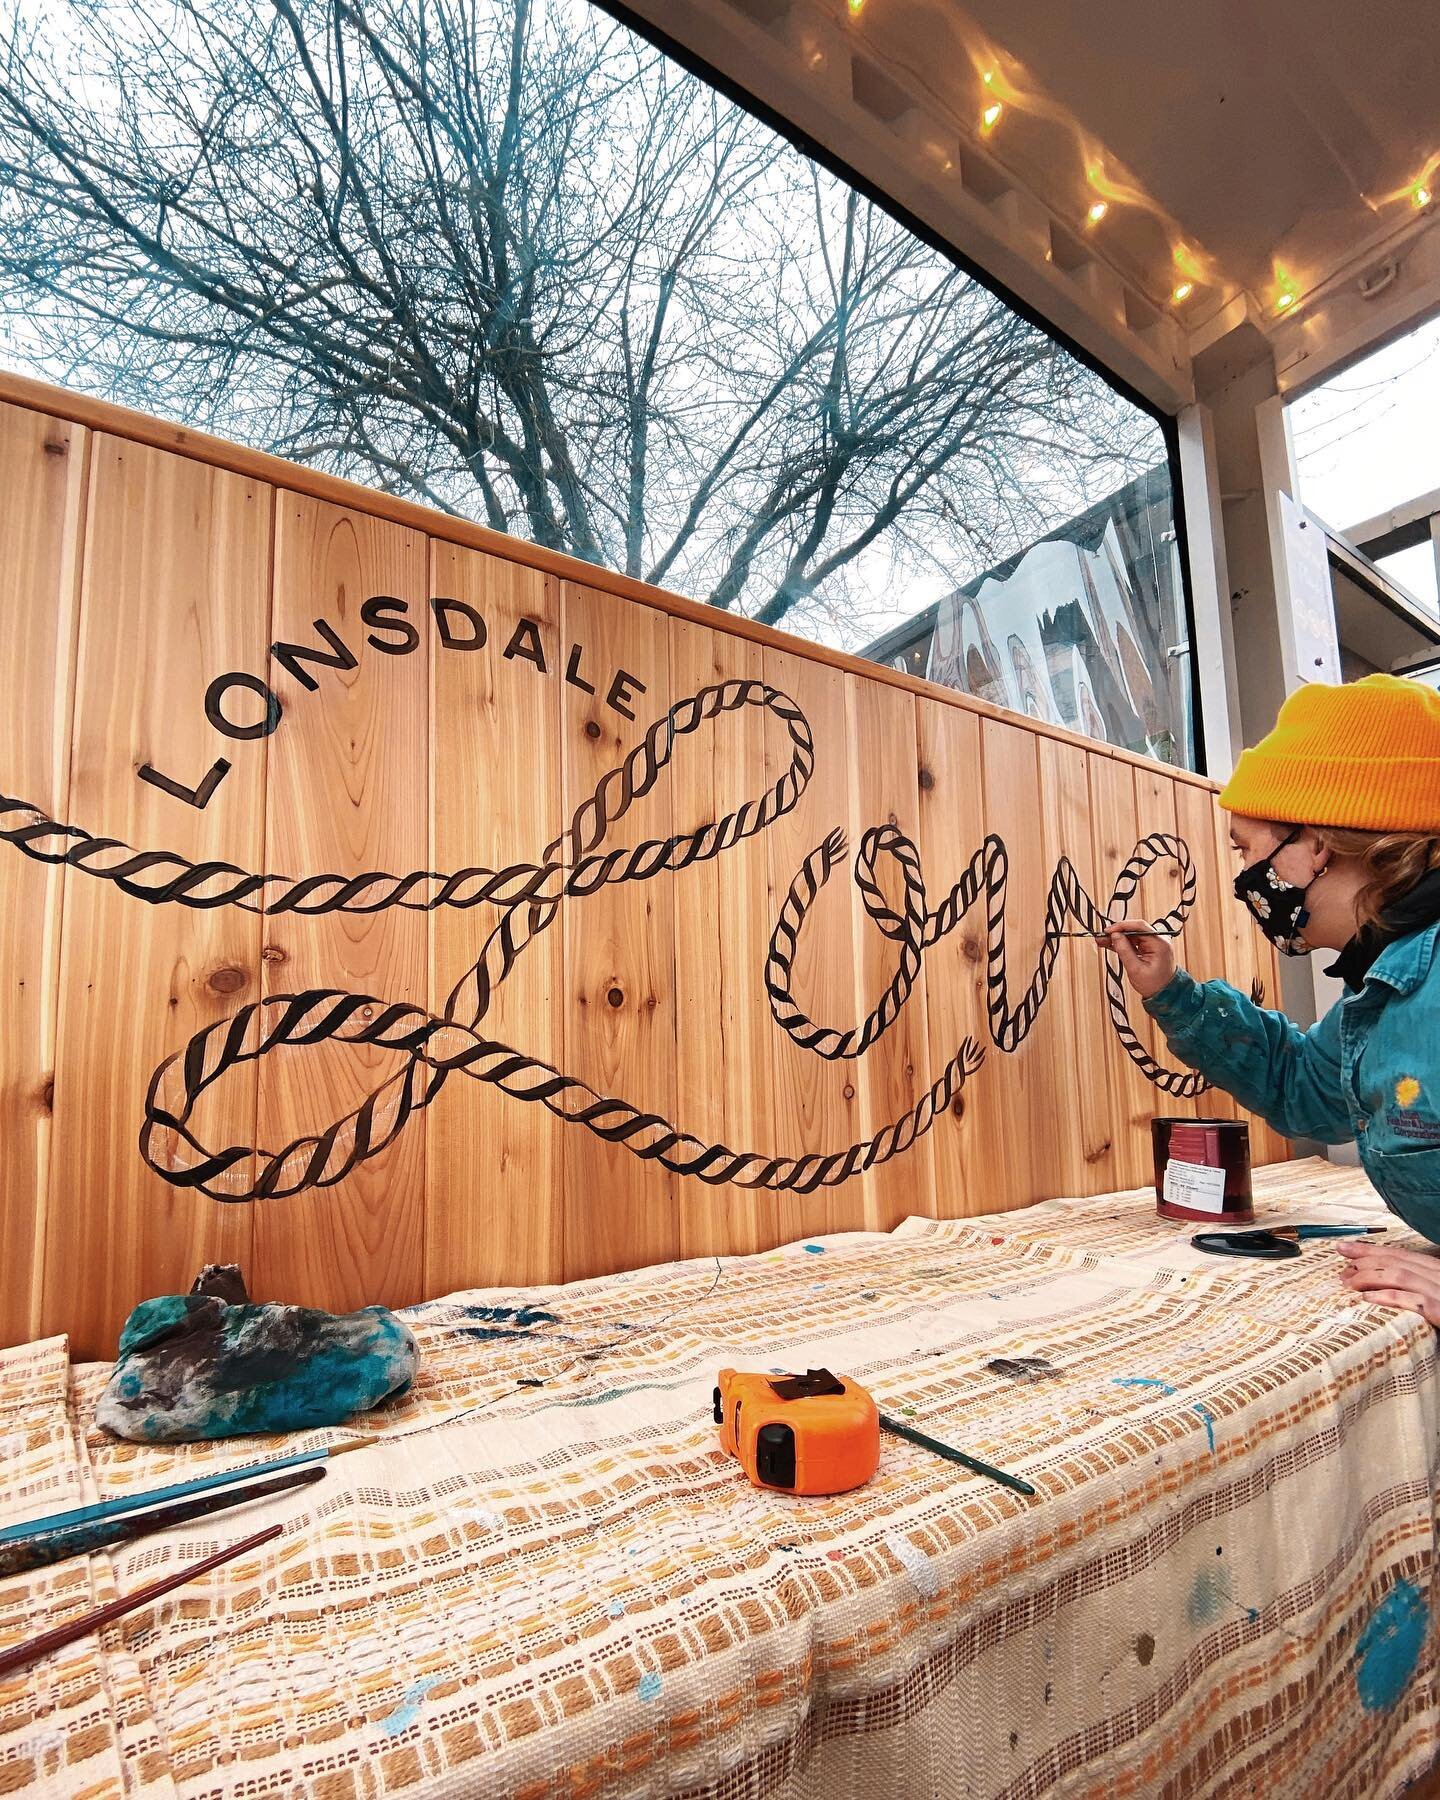 ✨Sunday well spent ✨ #lonsdalelove
.
.
.
[image description: Erica paints the words &ldquo;Lonsdale Love&rdquo; in black on a warm wooden background. The word &ldquo;Lonsdale&rdquo; is shown in all-caps arched above the word &ldquo;Love&rdquo; in cur